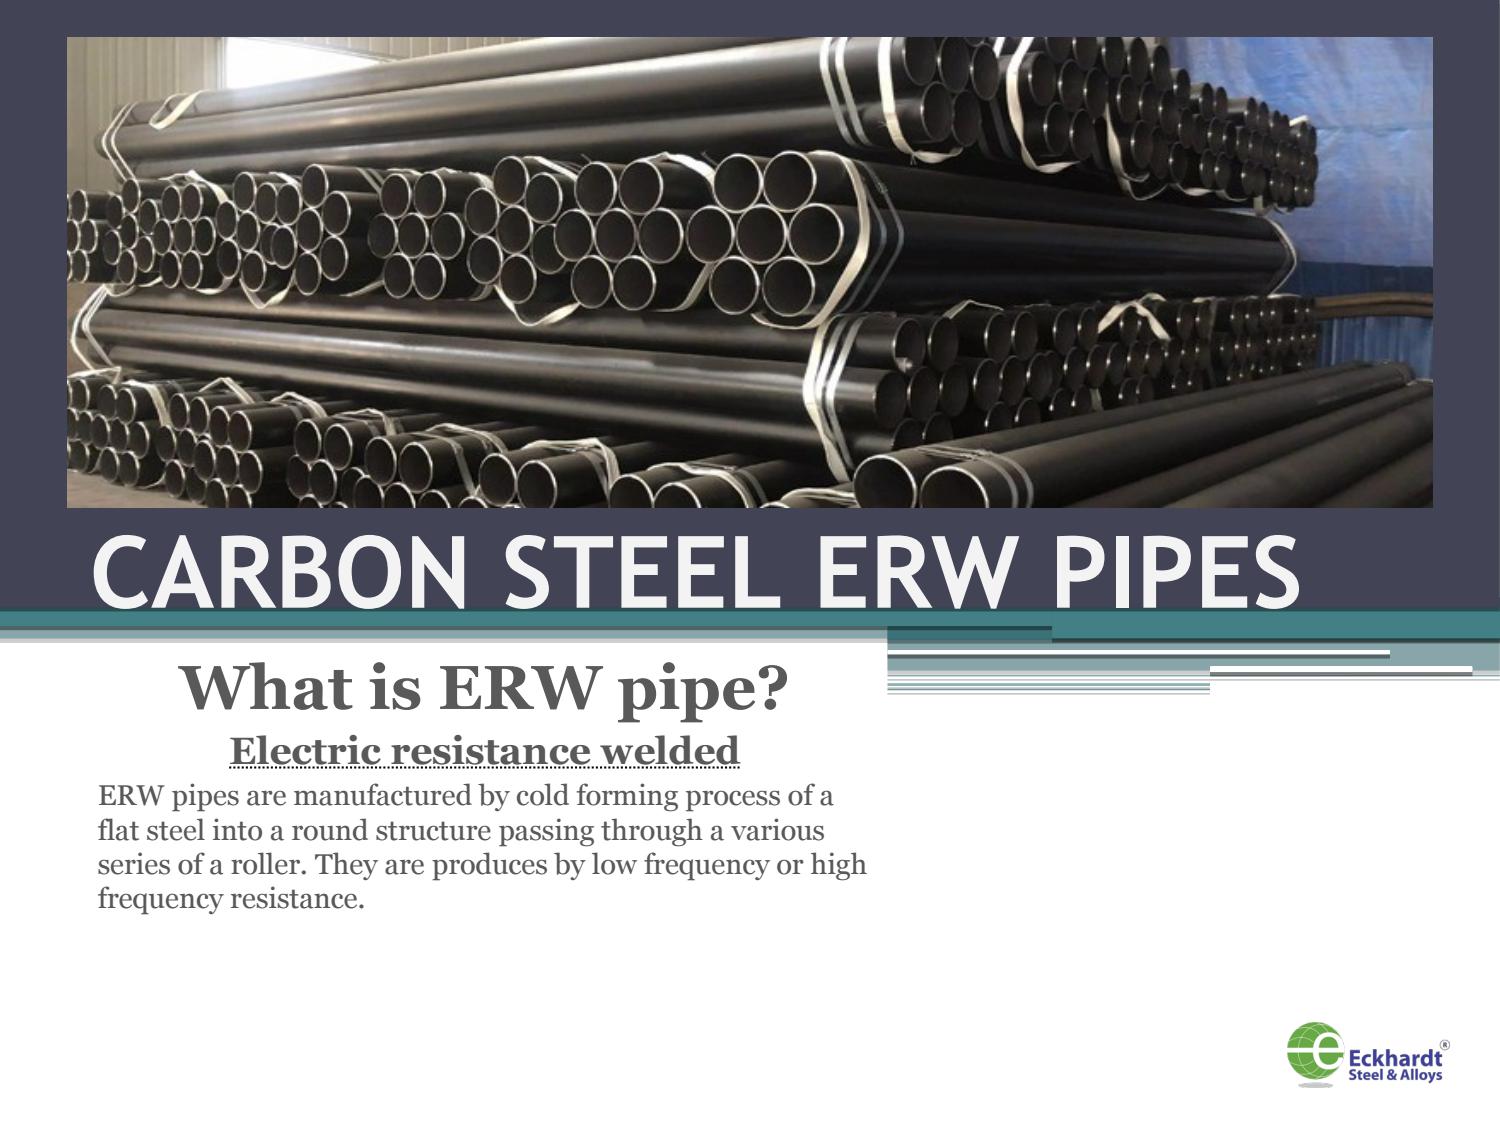 3 0A 298 9 < Pe ®

109/99) 3. A
RANE SRY YY 2 YS
: 2A \ Ps AS TTR .

 

 

 

 

 

ITTY —— FT '
“adhe NS YY R=
Tas iiEne LOA Ya am
A Soa an Da

CARBON STEEL ERW PIPES

What is ERW pipe?

Electric resistance welded
ERW pipes are manufactured by cold forming pro
fla el into a round structure pa

ng through
ies of a roller,

They are produces by low frequency or high

frequency resistance.

 

—C Eckhardt’

5 Steel & Alloys